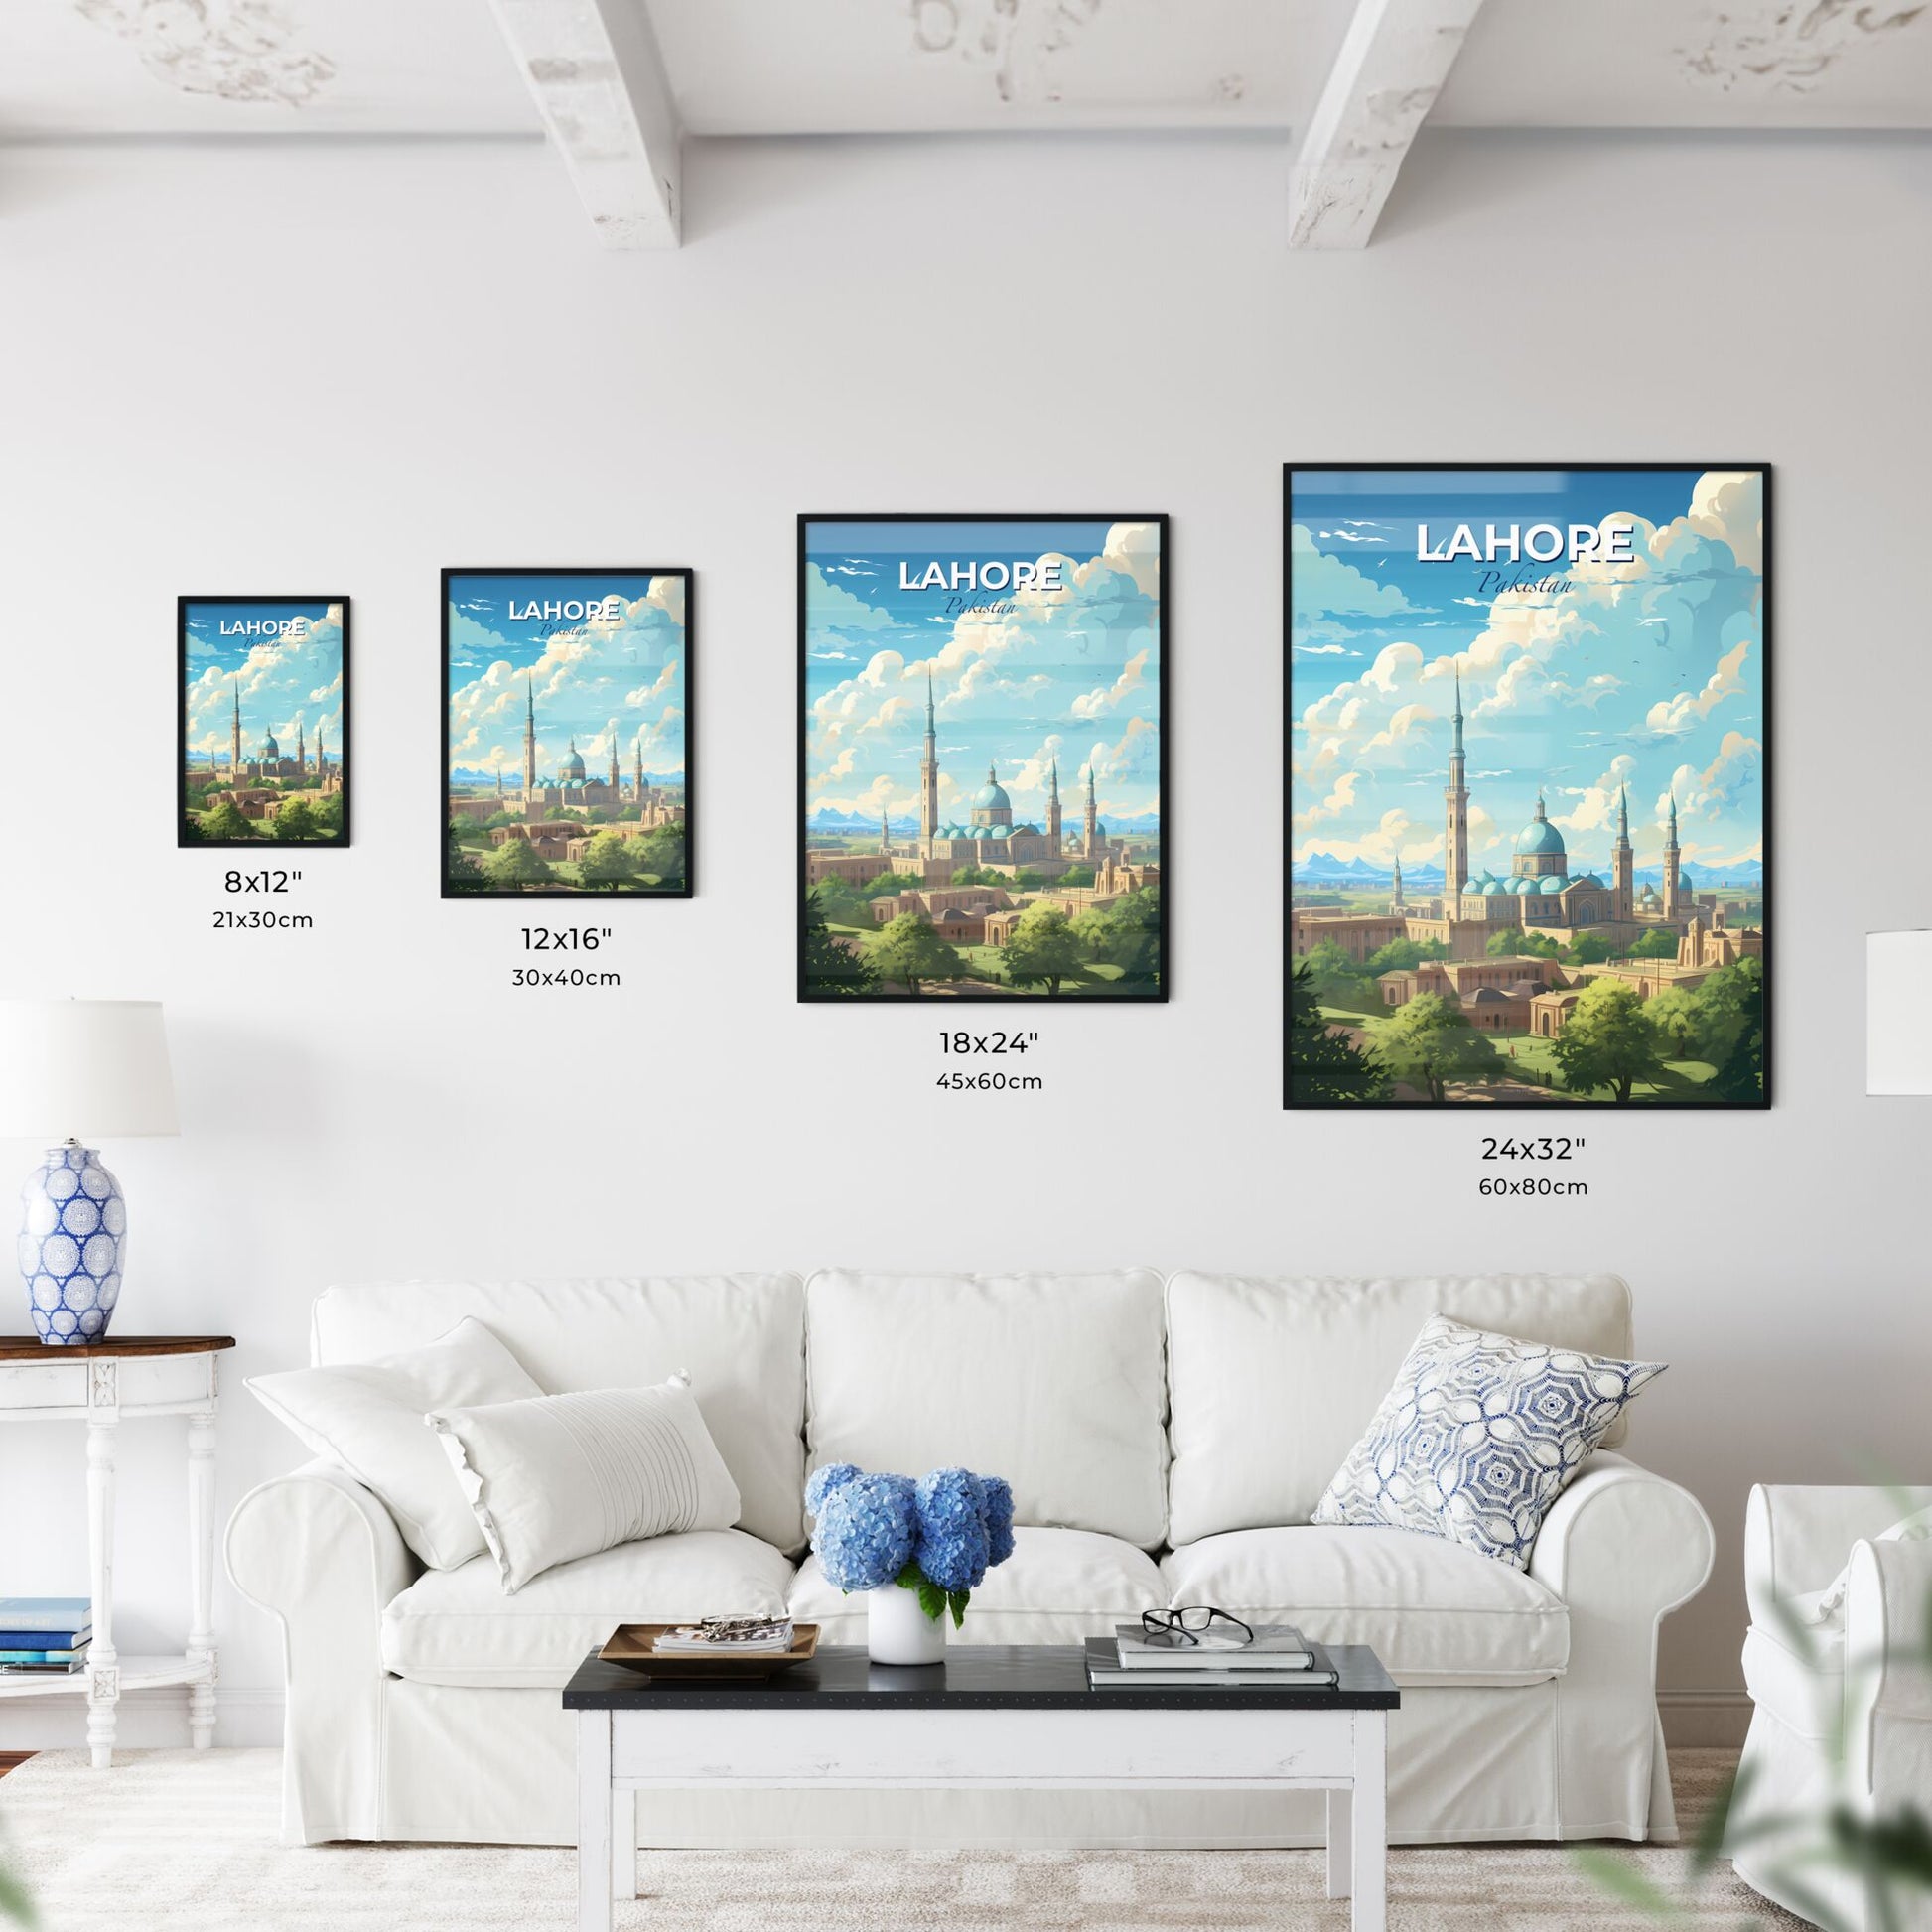 Lahore Pakistan Skyline - A Large Building With Towers And Towers - Customizable Travel Gift Default Title